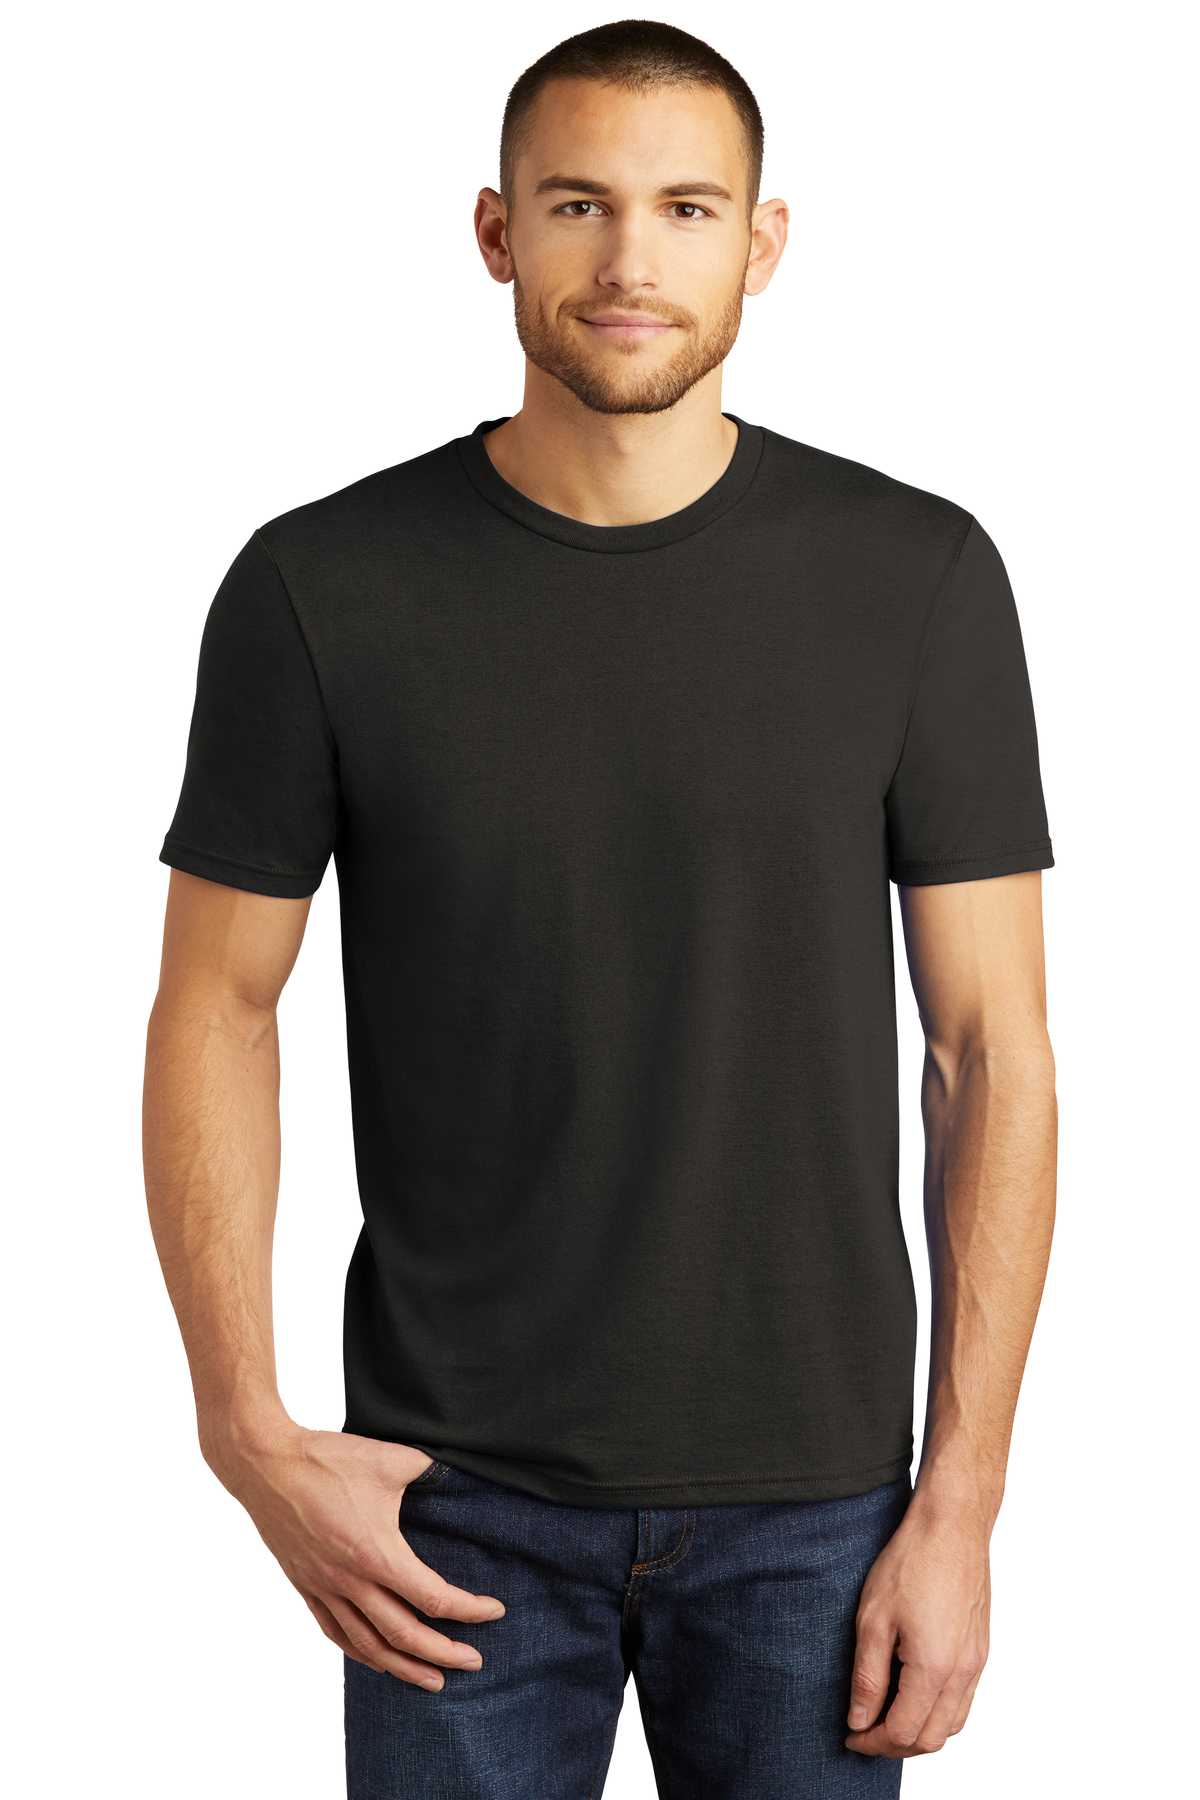 District Embroidered Men's Perfect Tri-Blend Crew Tee - Queensboro